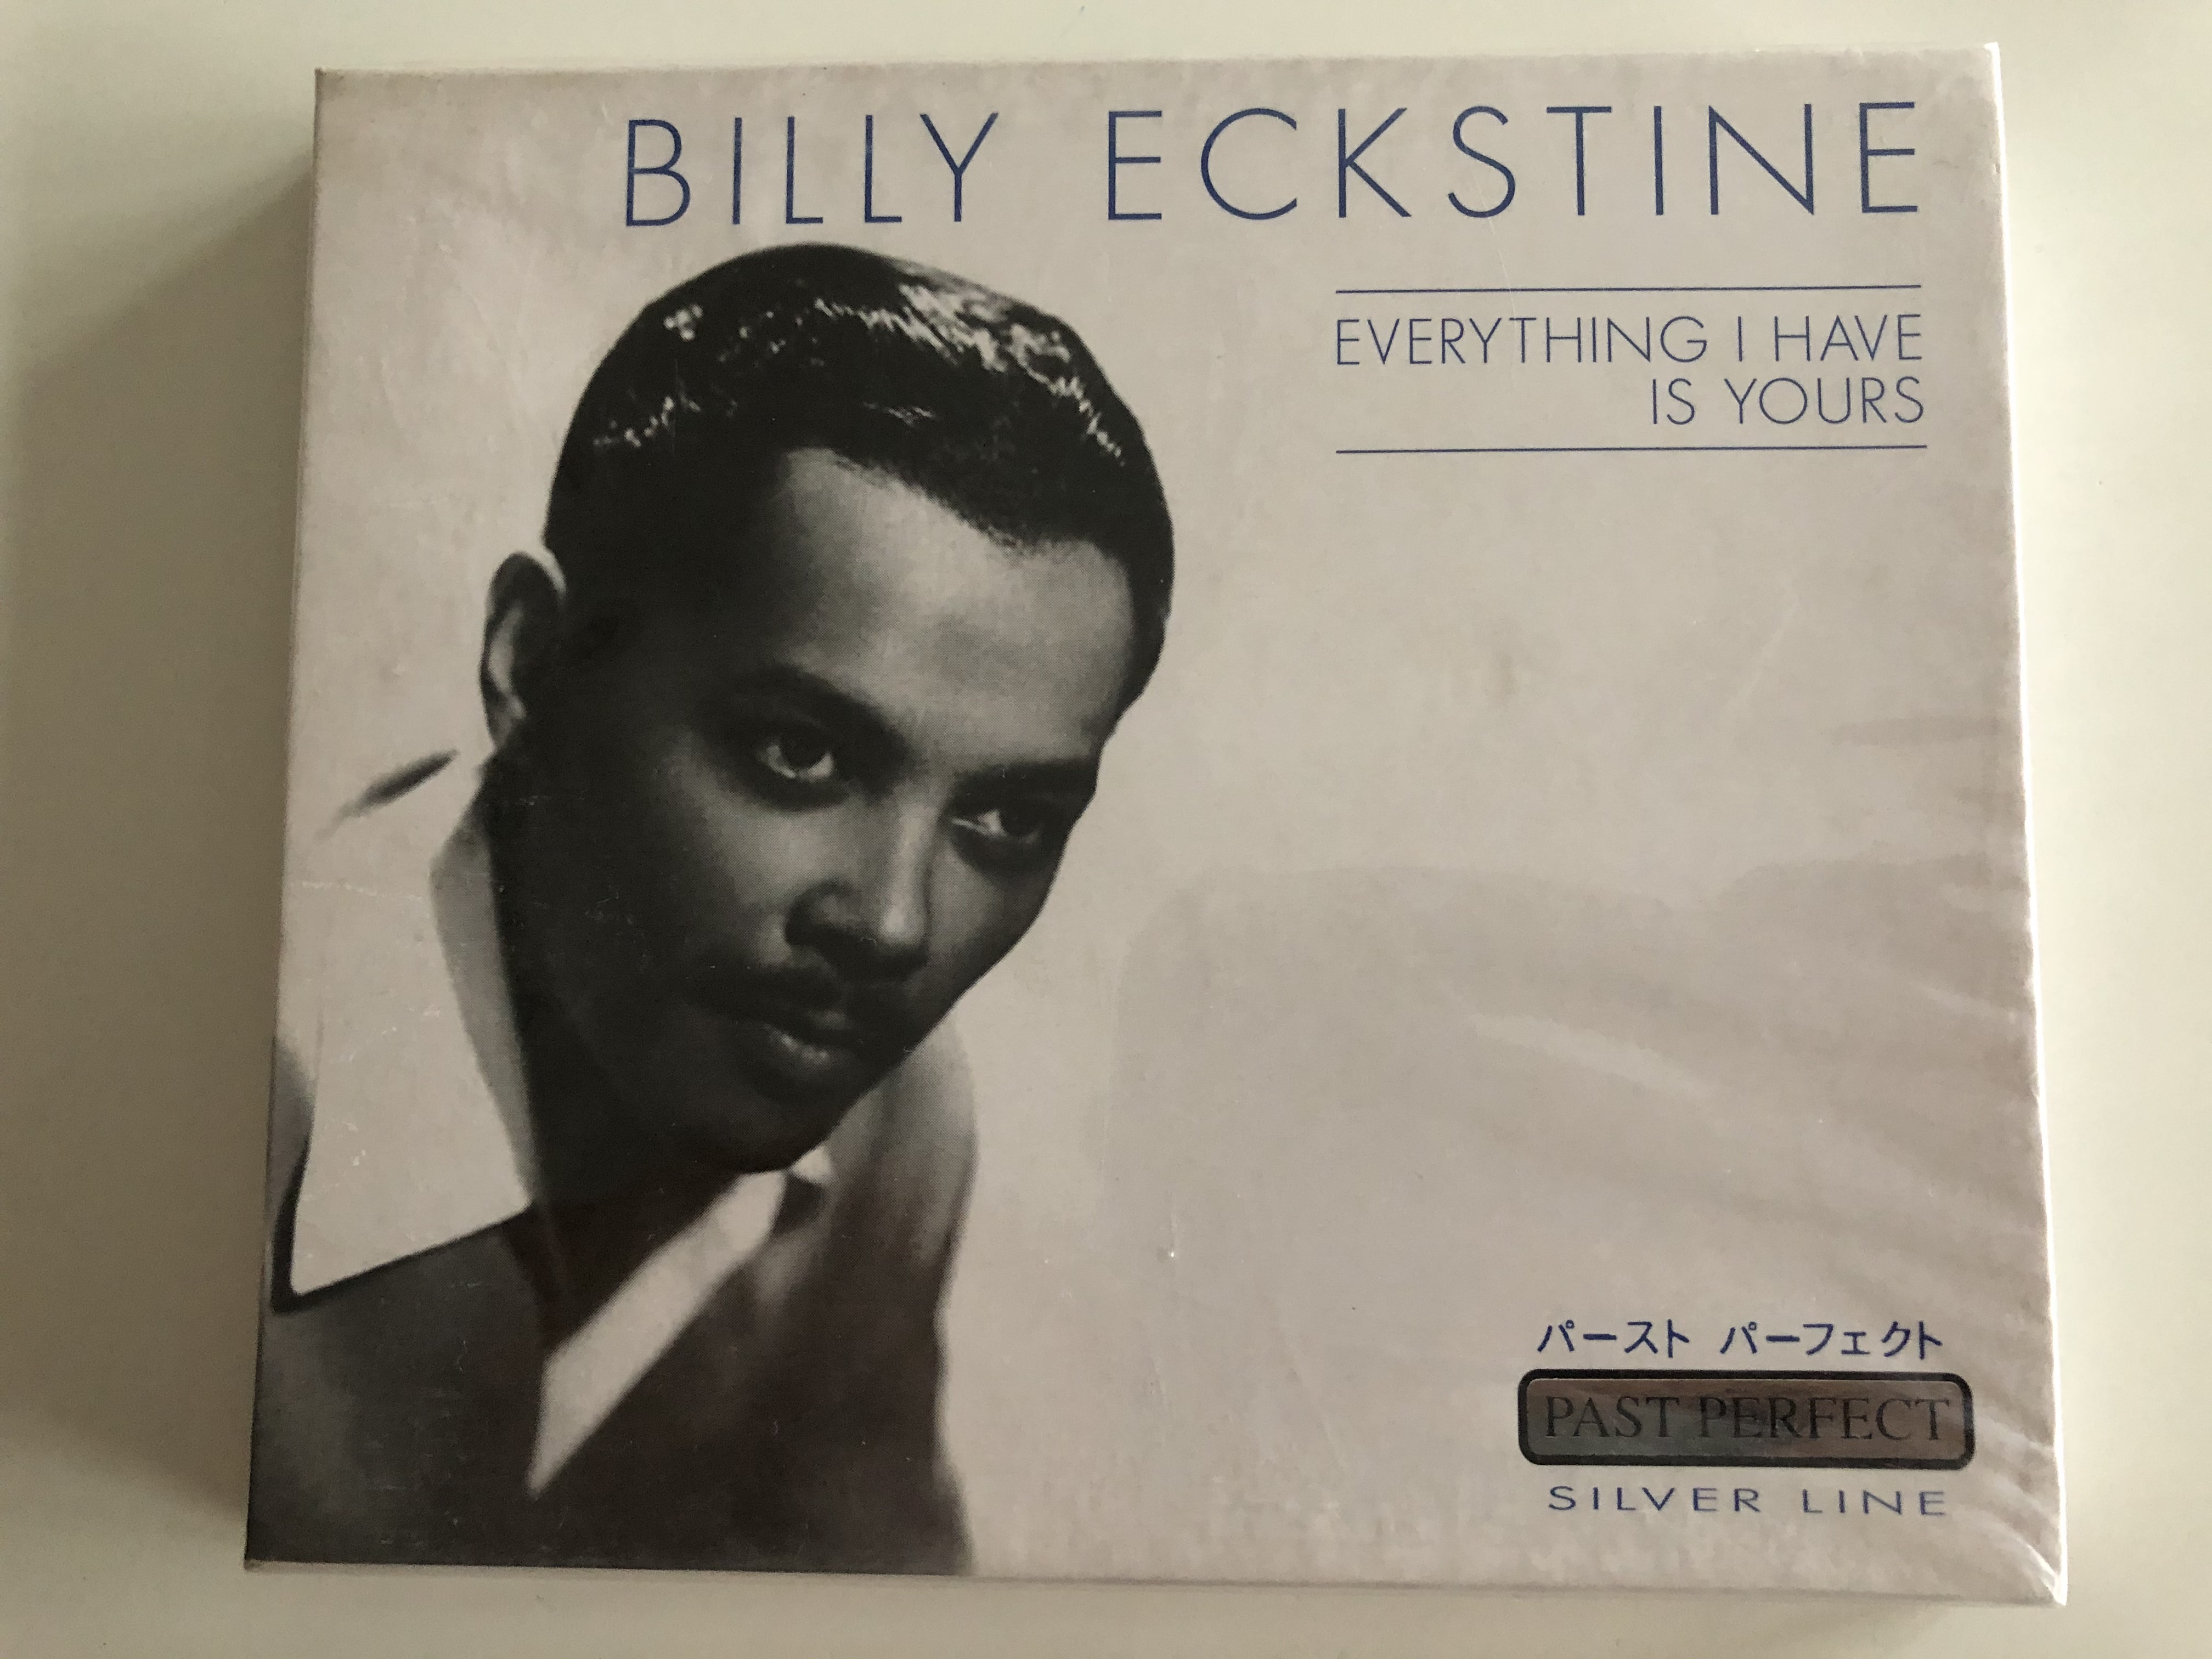 billy-eckstine-everything-i-have-is-yours-past-perfect-silver-line-audio-cd-2001-205722-203-1-.jpg